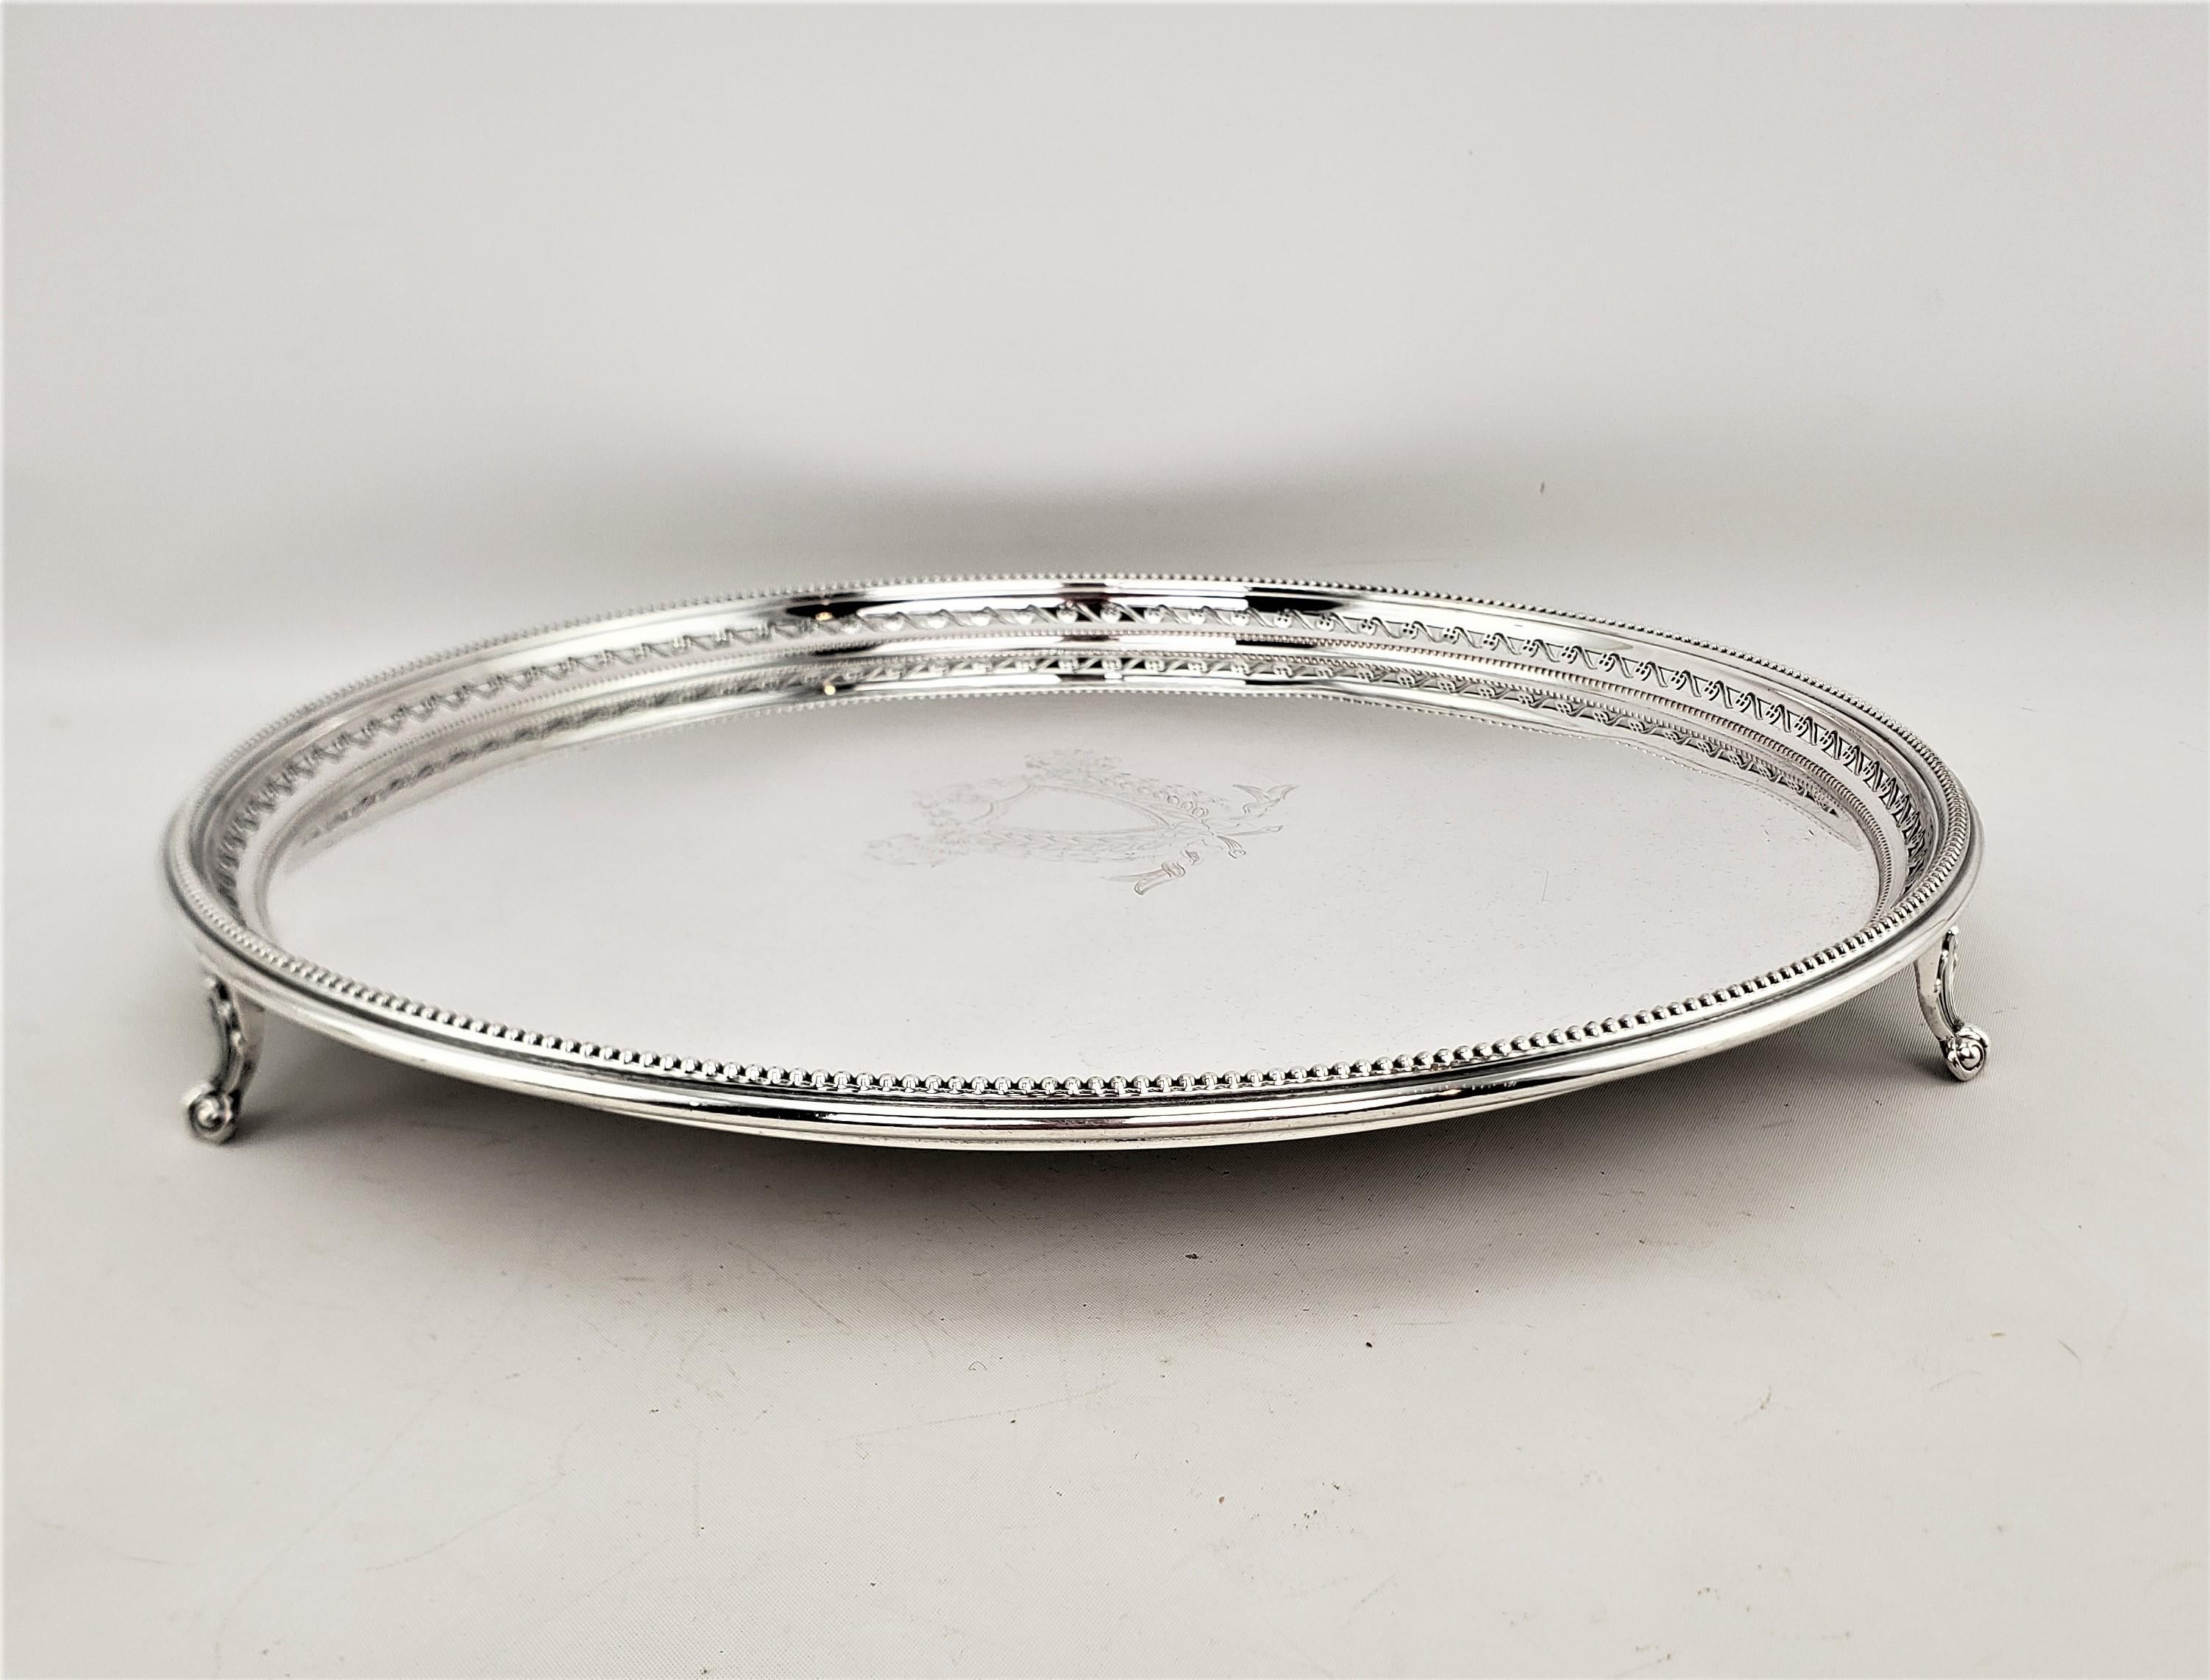 Machine-Made Antique Silver Plated Barker Ellis Round Footed Serving Tray or Salva